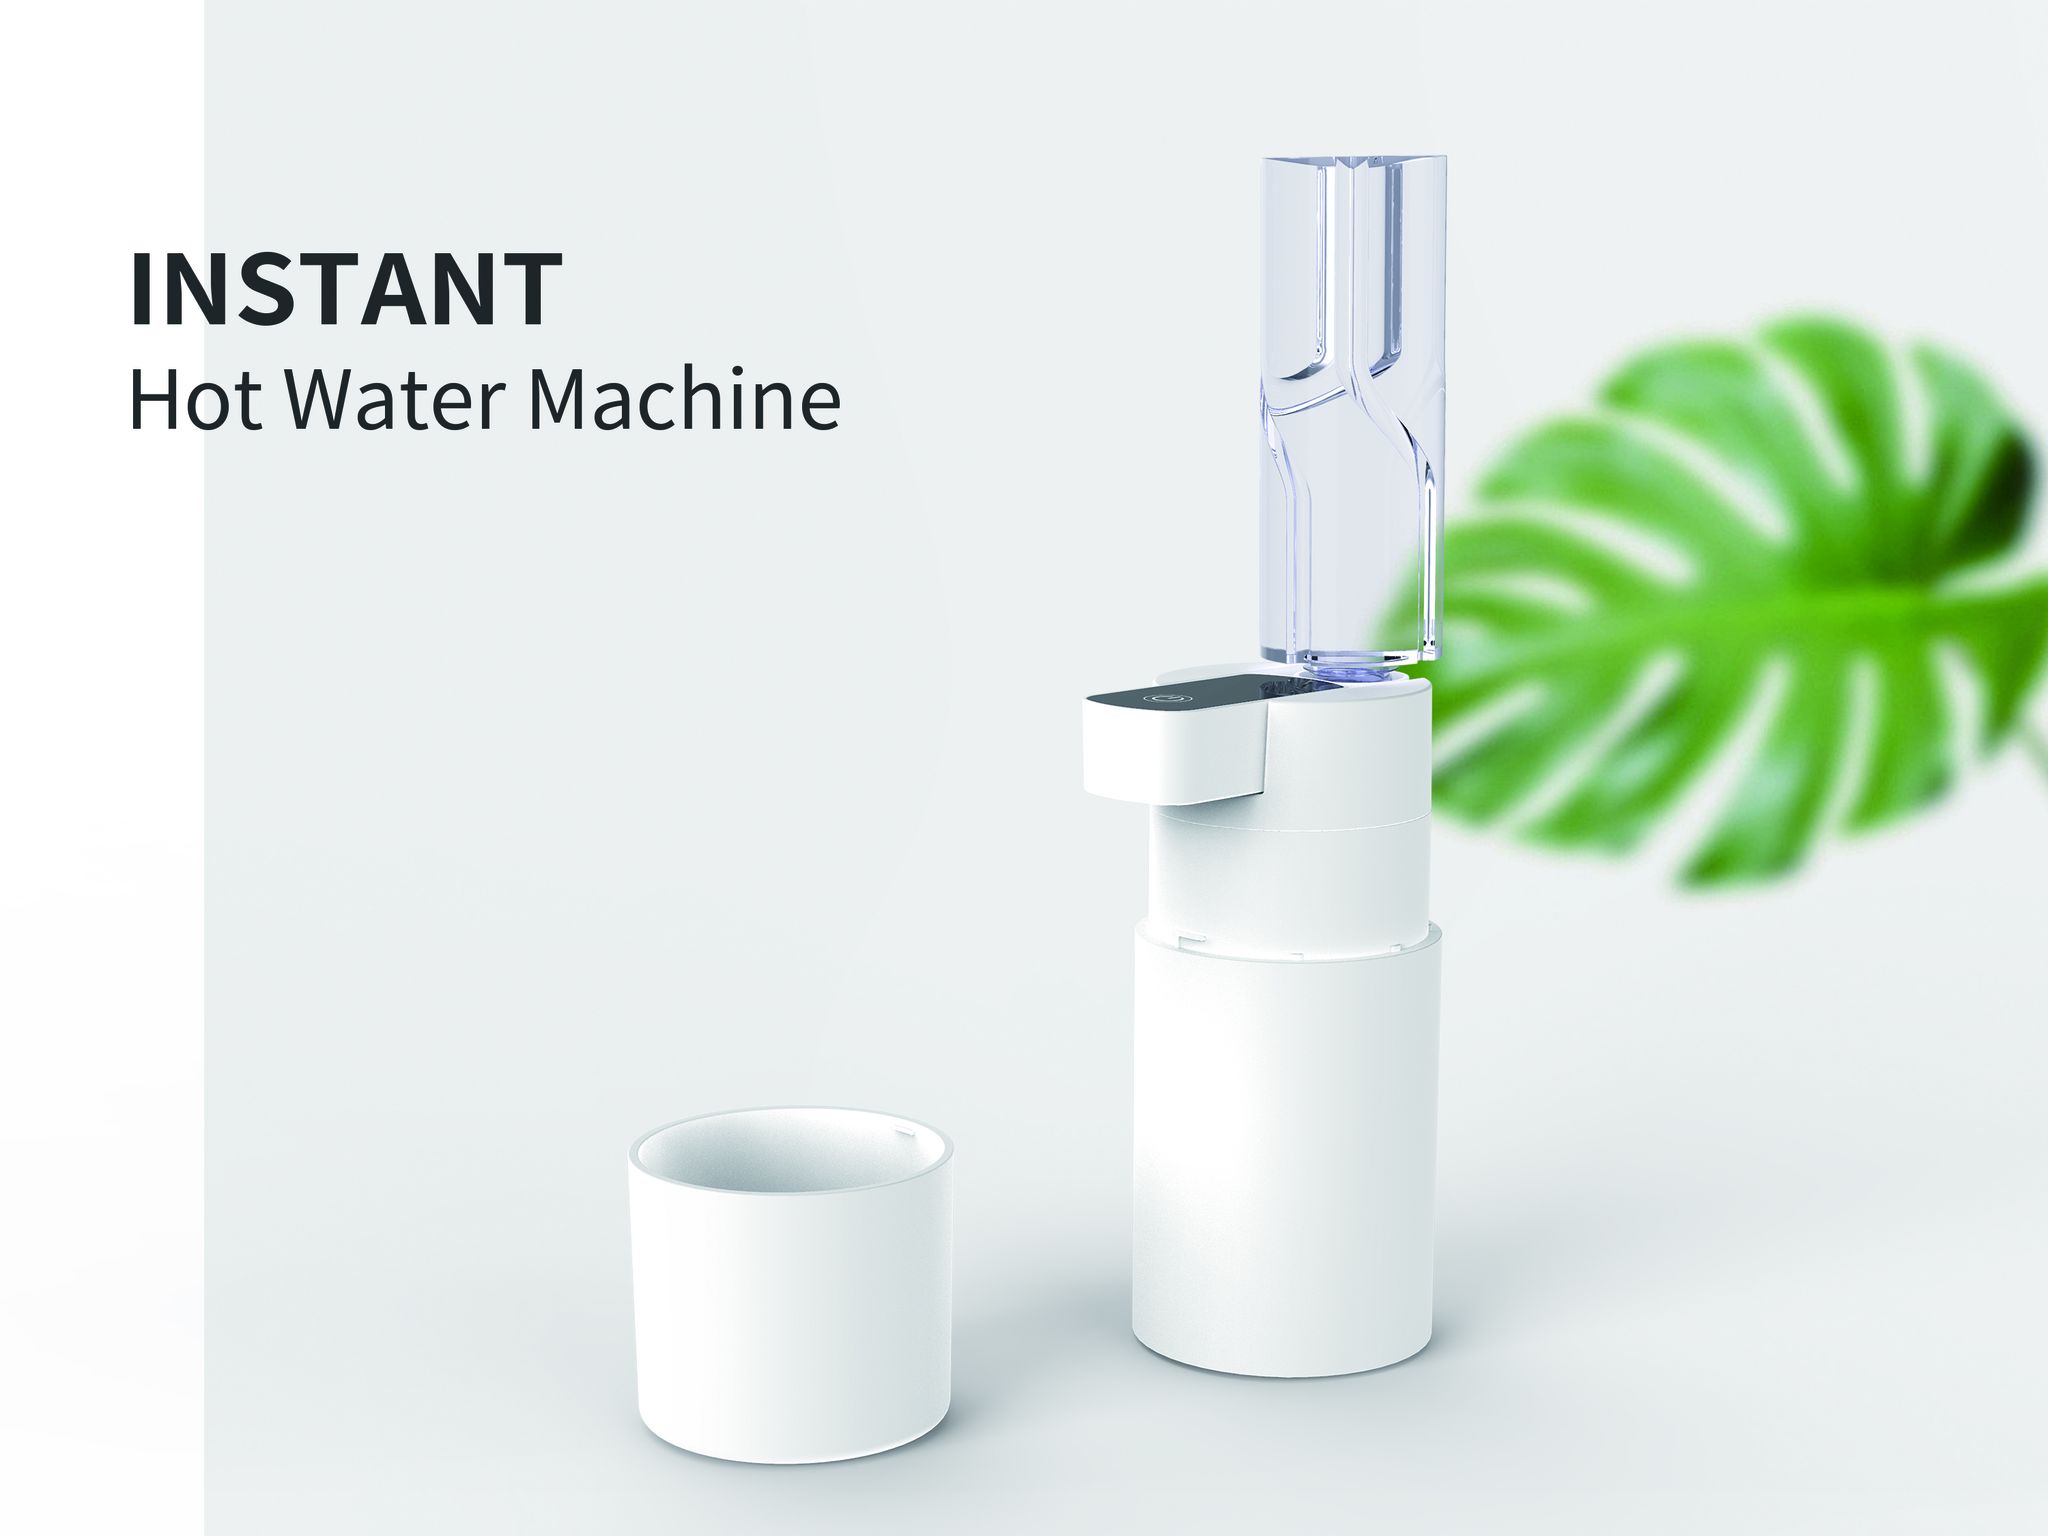 Portable instant hot water machine